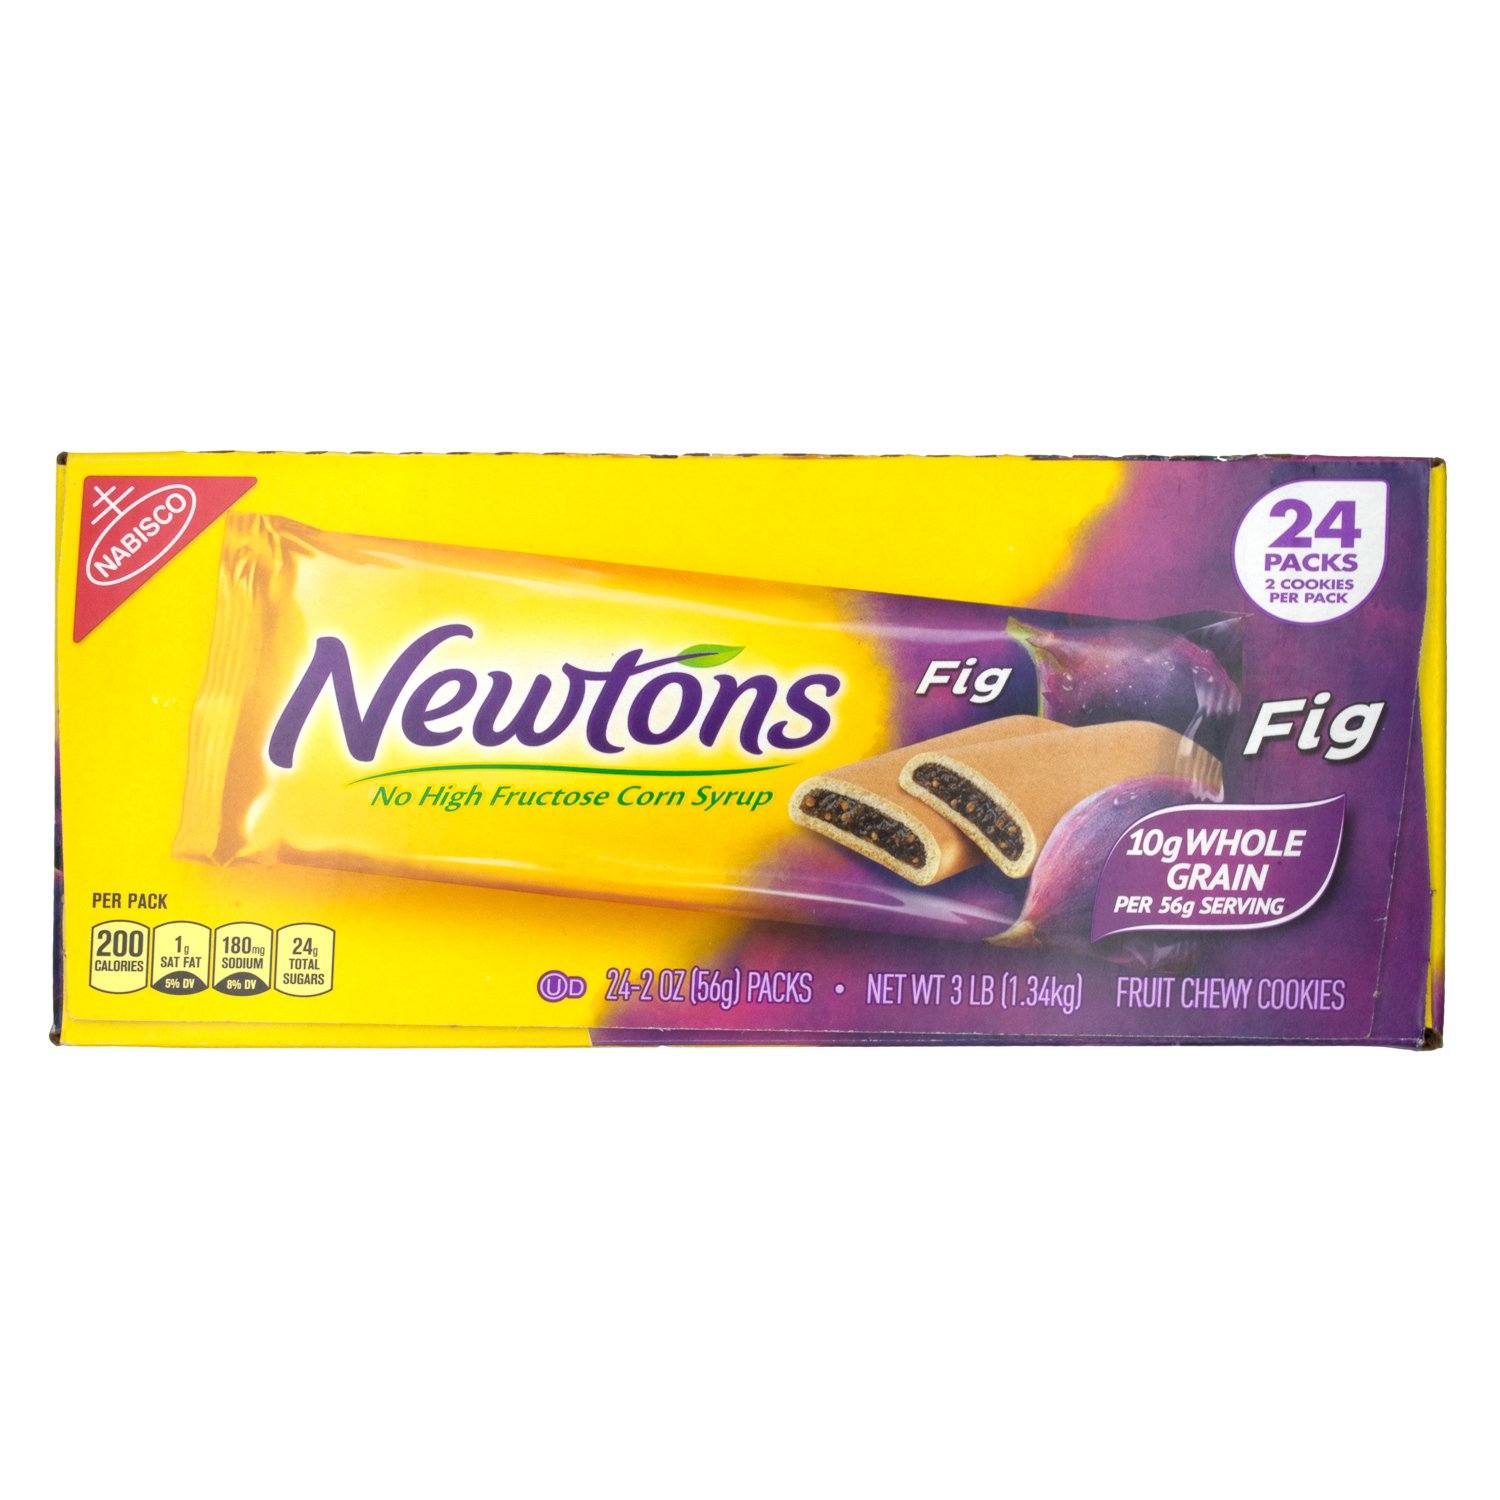 Newtons Soft and Chewy Cookies Newtons Fig 2 Oz-24 Count 